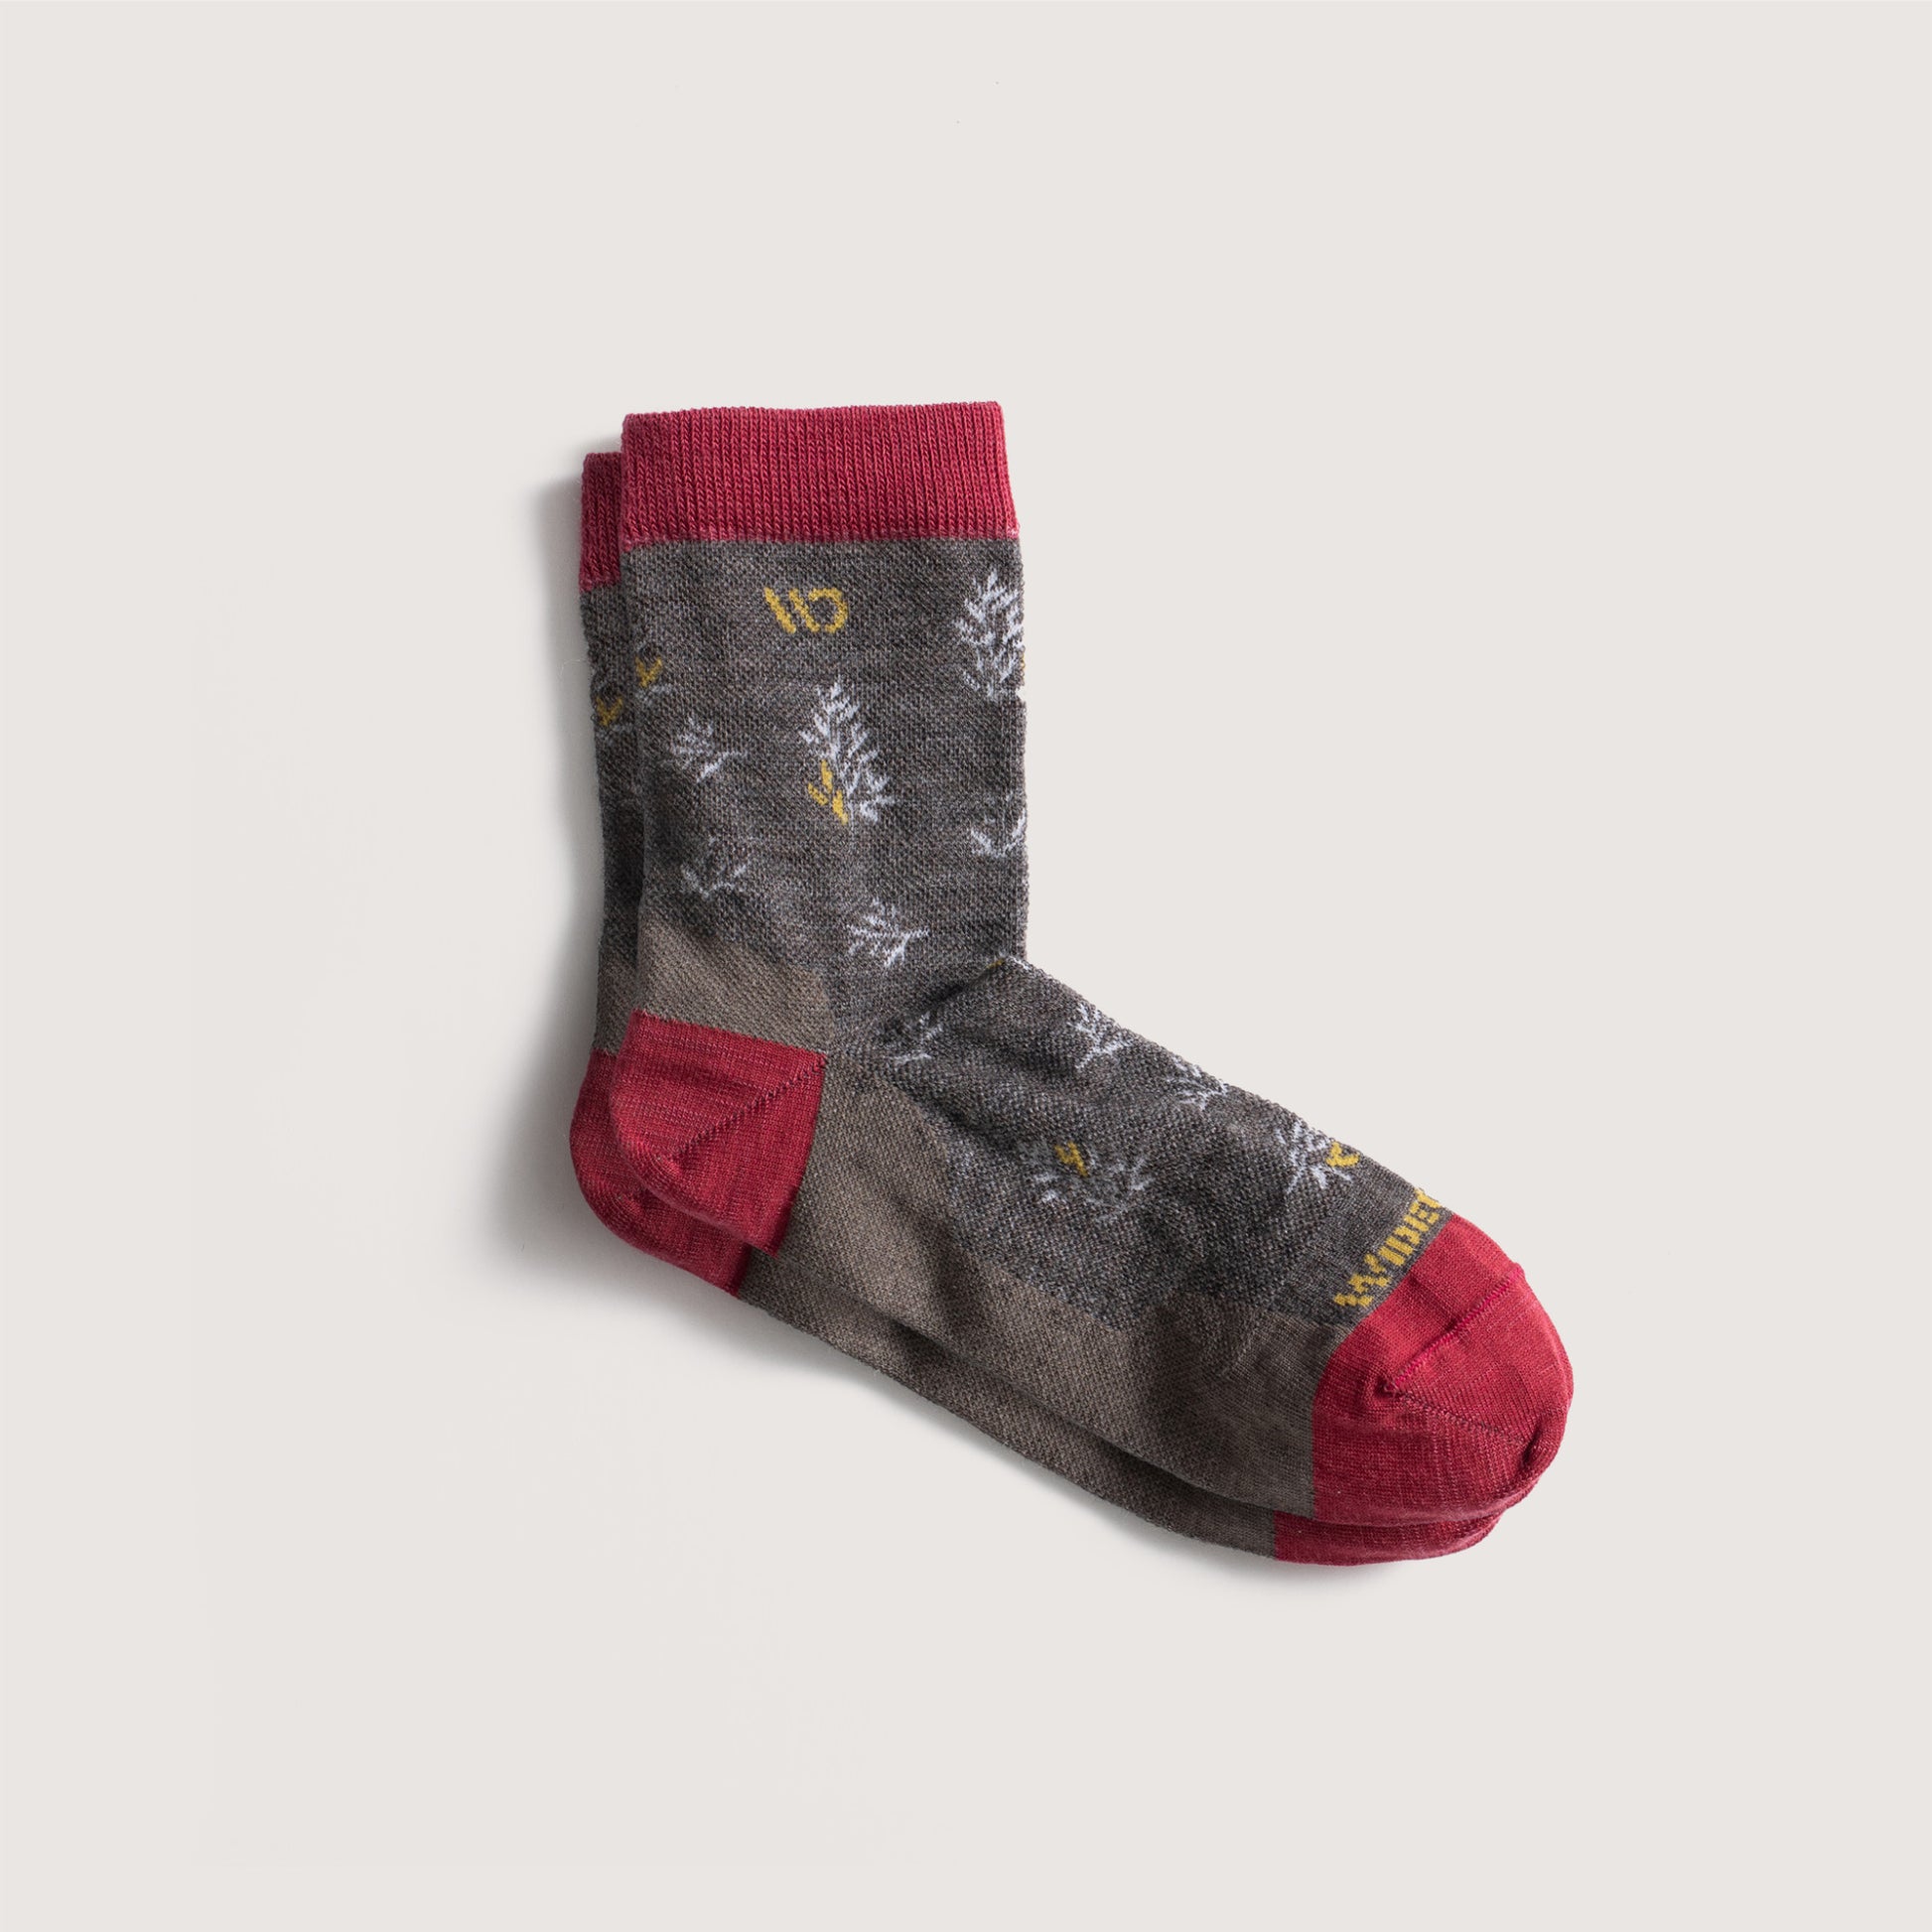 Flat socks featuring  maroon heel/toe/cuff, taupe body, yellow logo and white design --Taupe